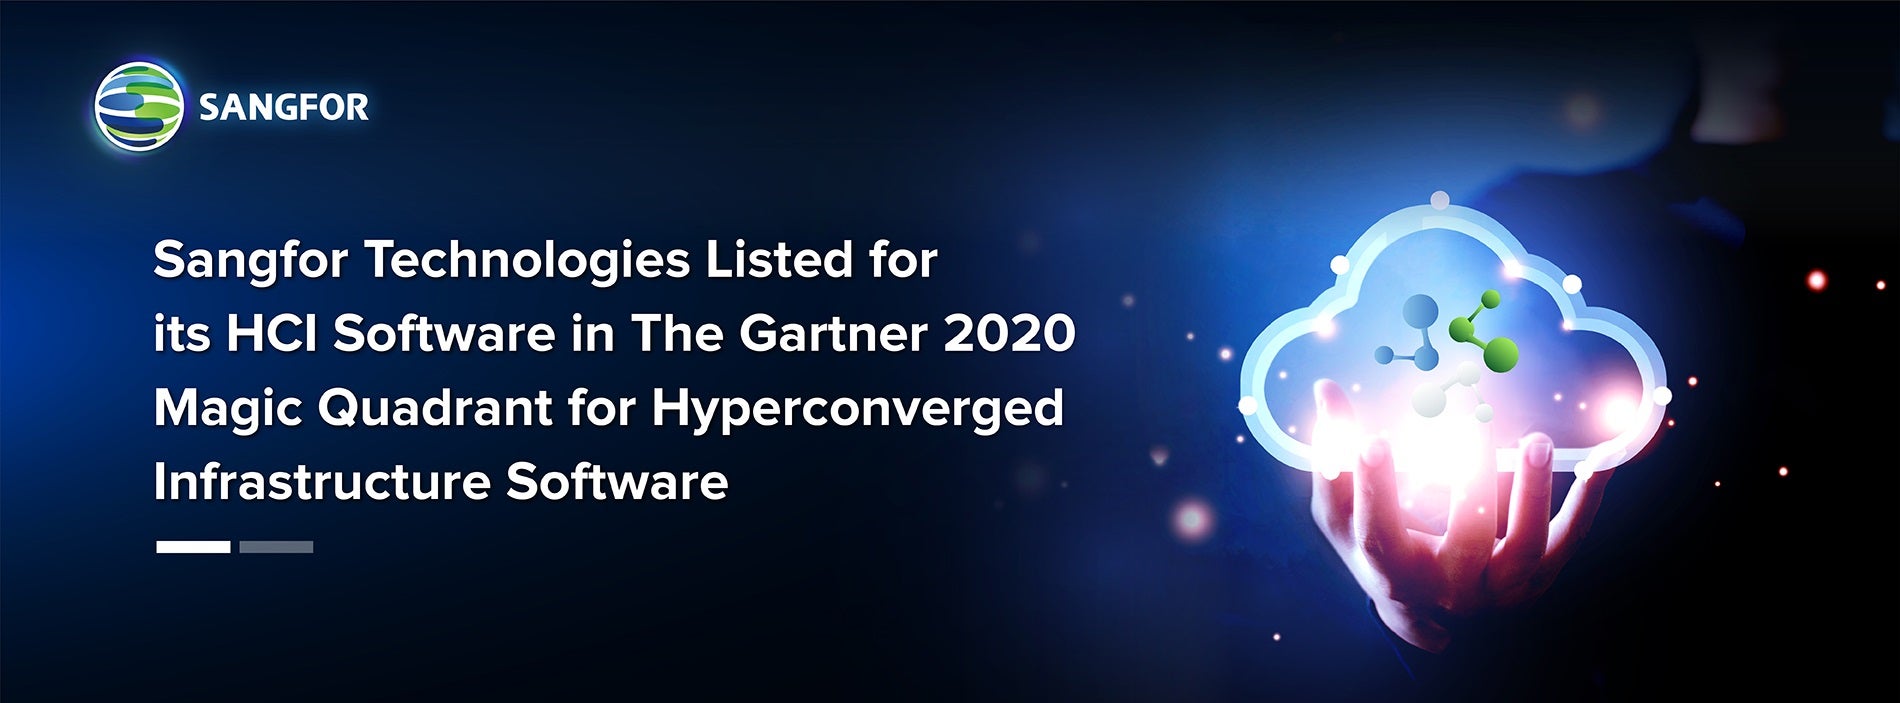 Sangfor Technologies Listed for Its HCI Software in The Gartner 2020 Magic Quadrant